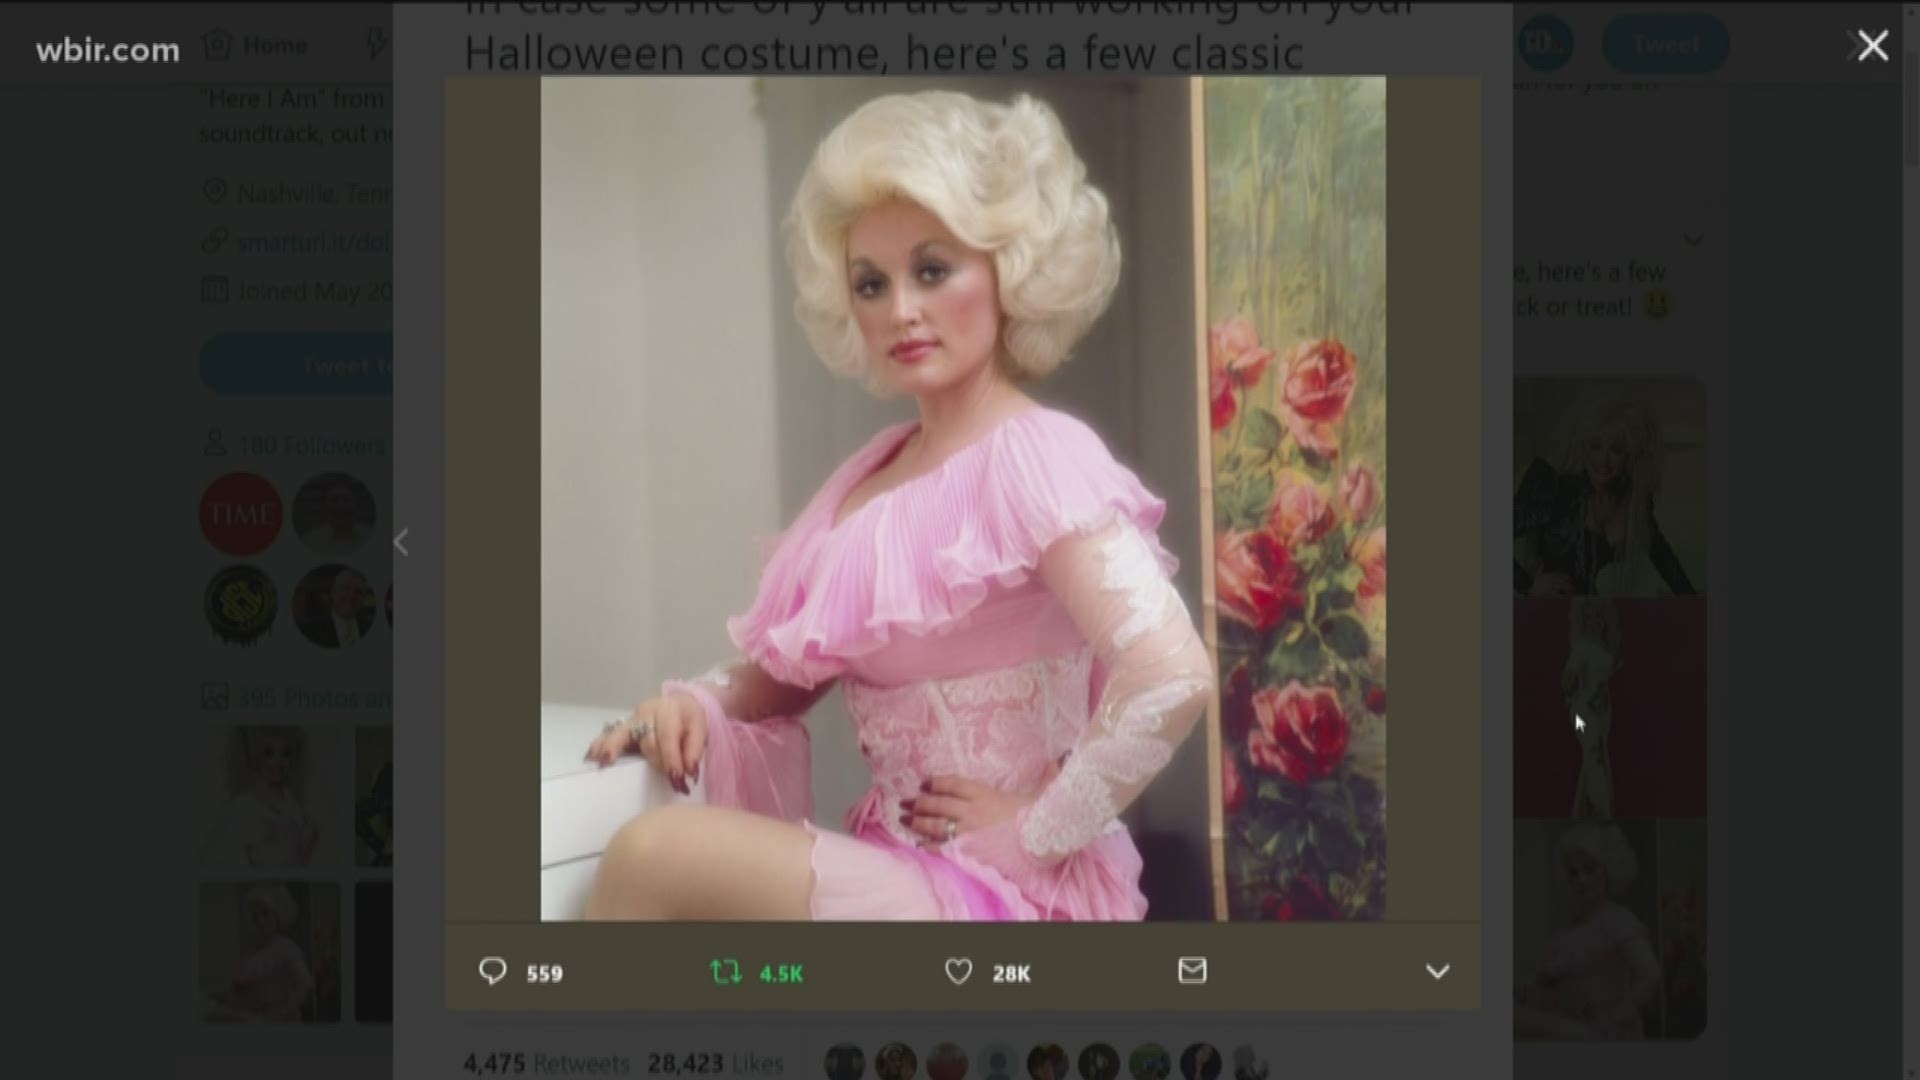 It takes a lot of money to look this cheap... a famous Dolly quote. But really.... it takes a lot of work to put together a costume like this. We called in The Costume Designer, Kelli Dieter, who has handmade hundreds of costumes over the years for people